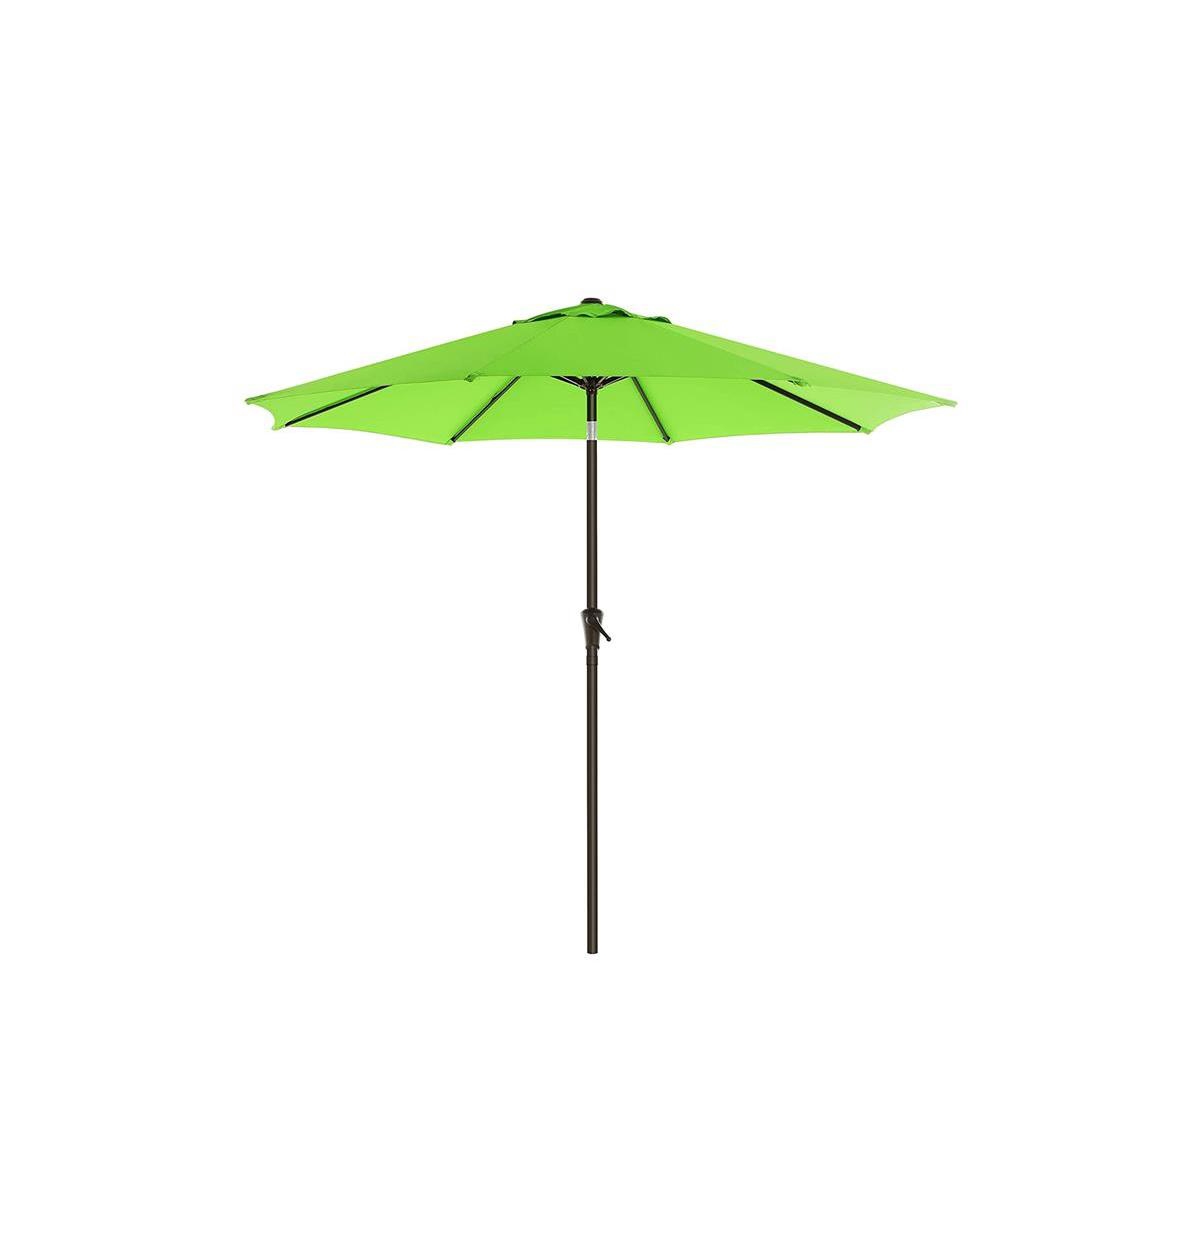 Outdoor Table Umbrella, Sun Shade, Octagonal Polyester Canopy, with Tilt and Crank Mechanism - Red